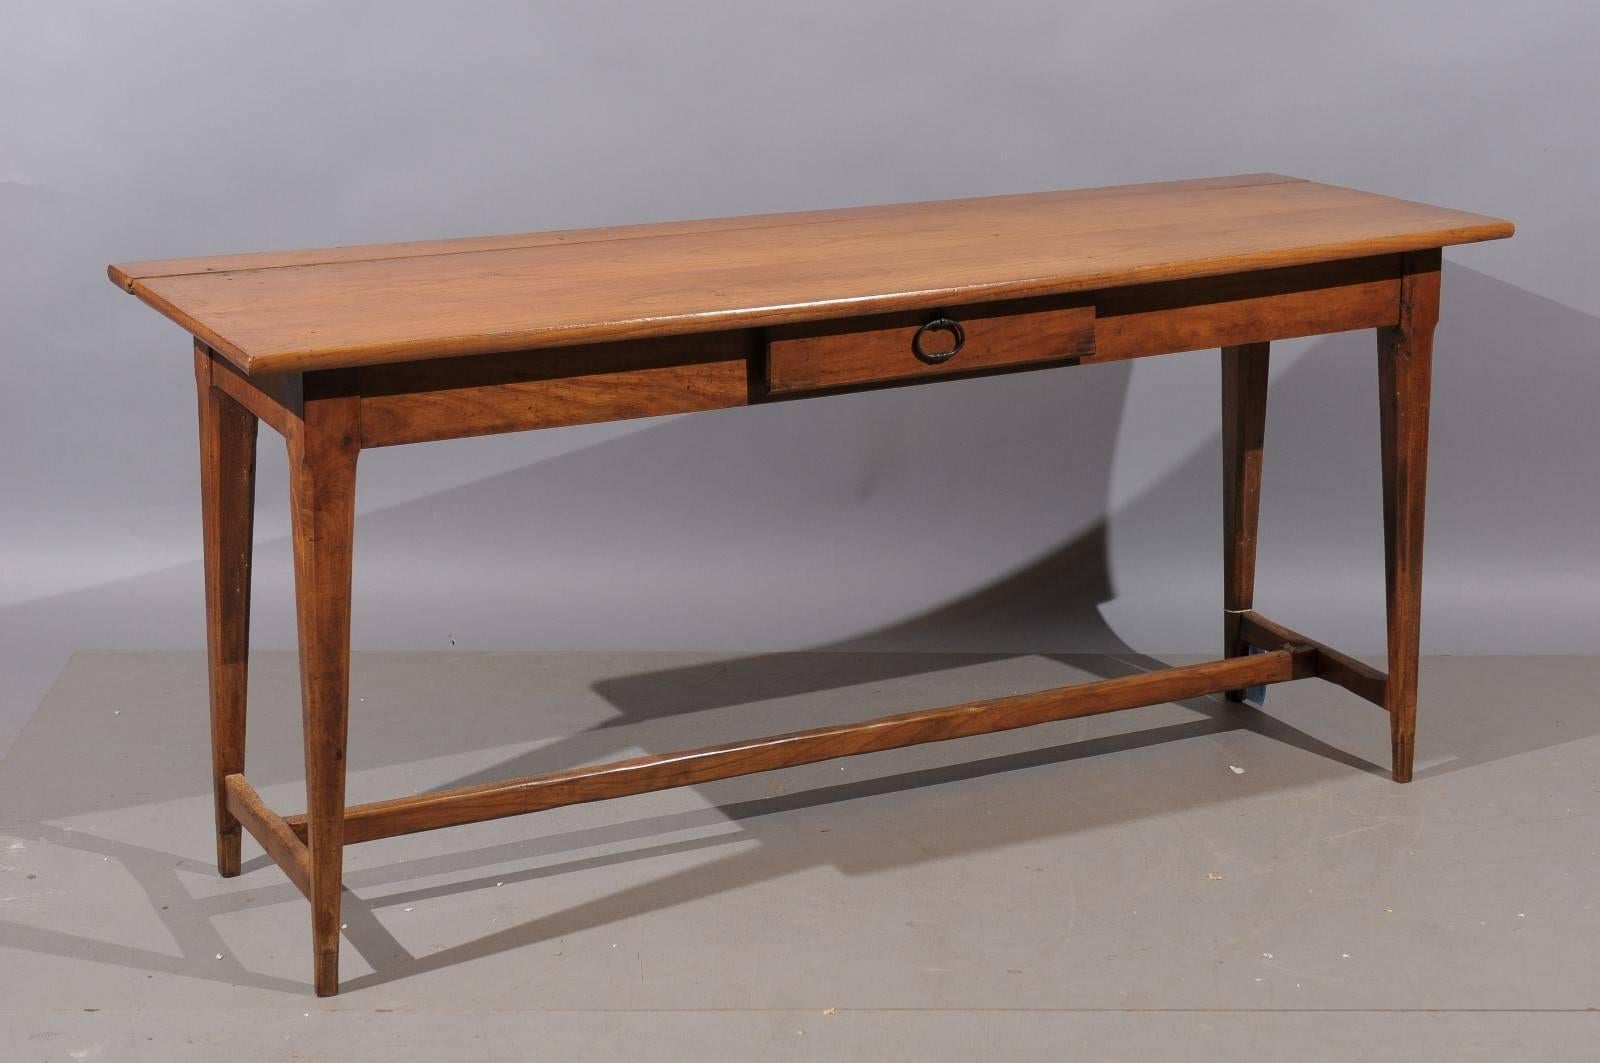 A French fruitwood server/console with drawer and tapering legs.